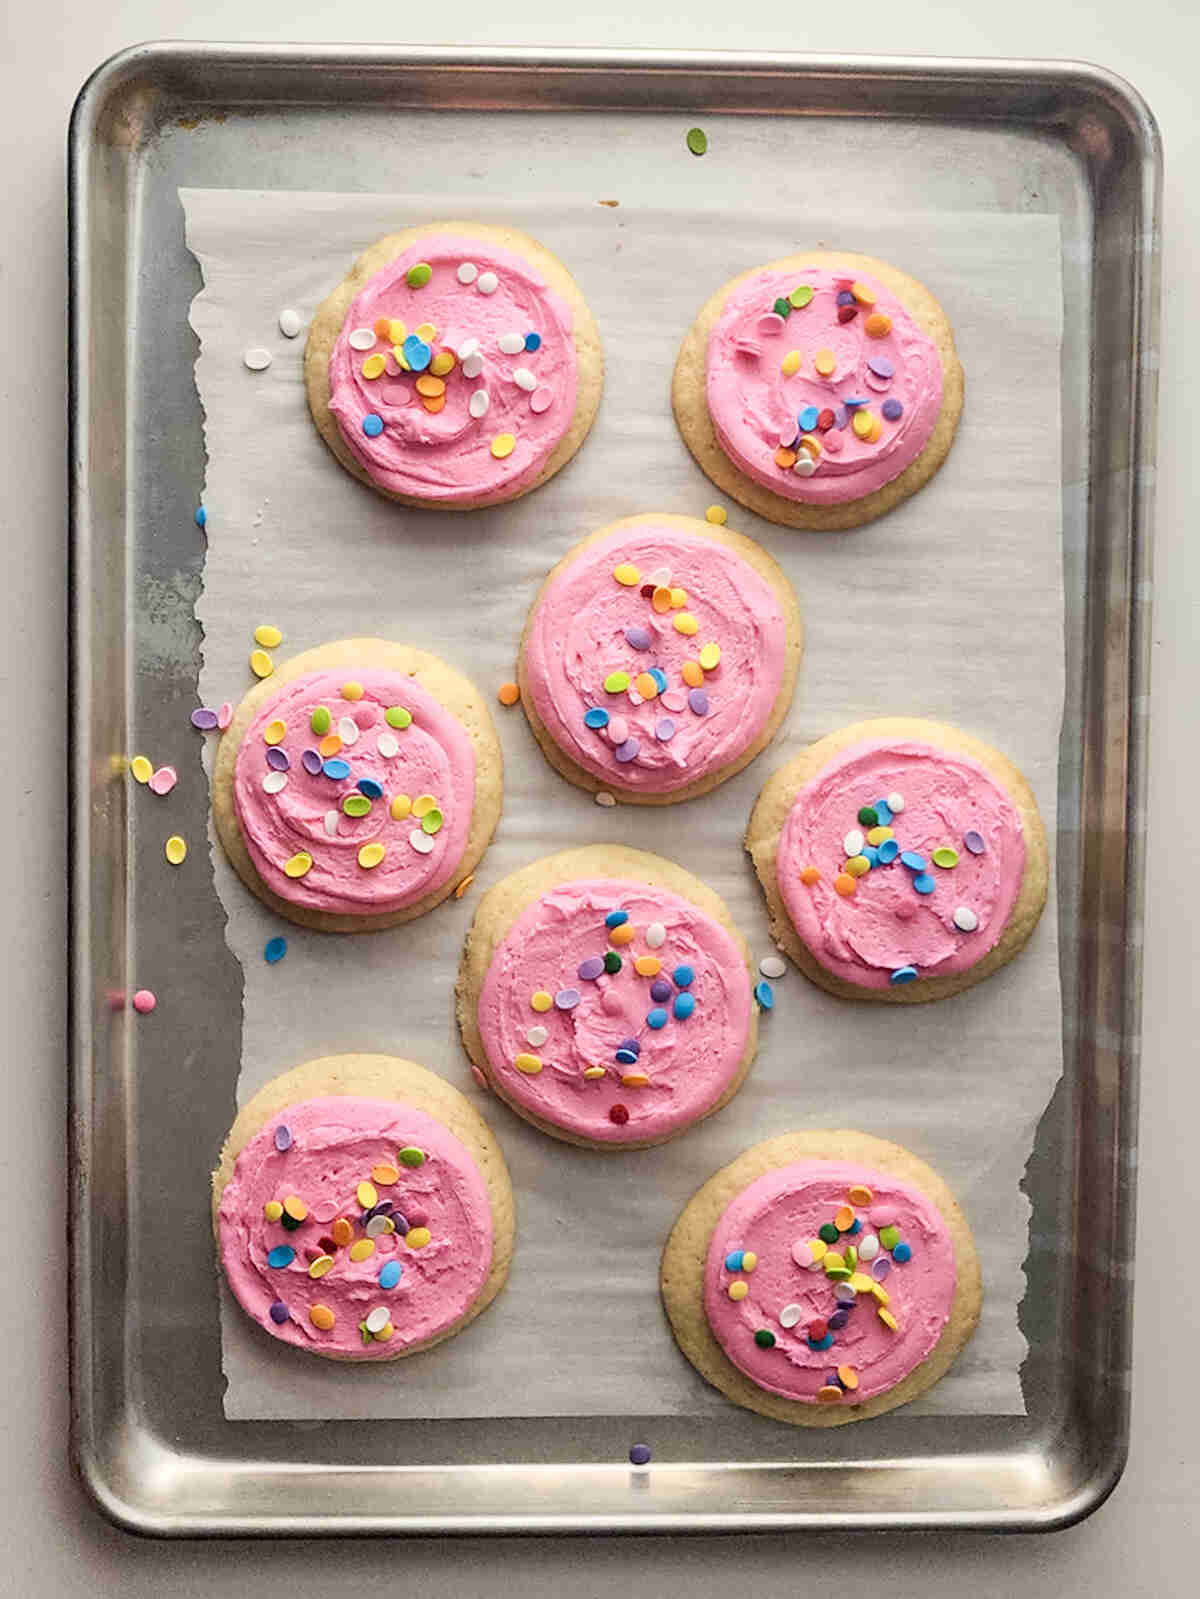 Frosted pink cookies on a baking tray with sprinkles.